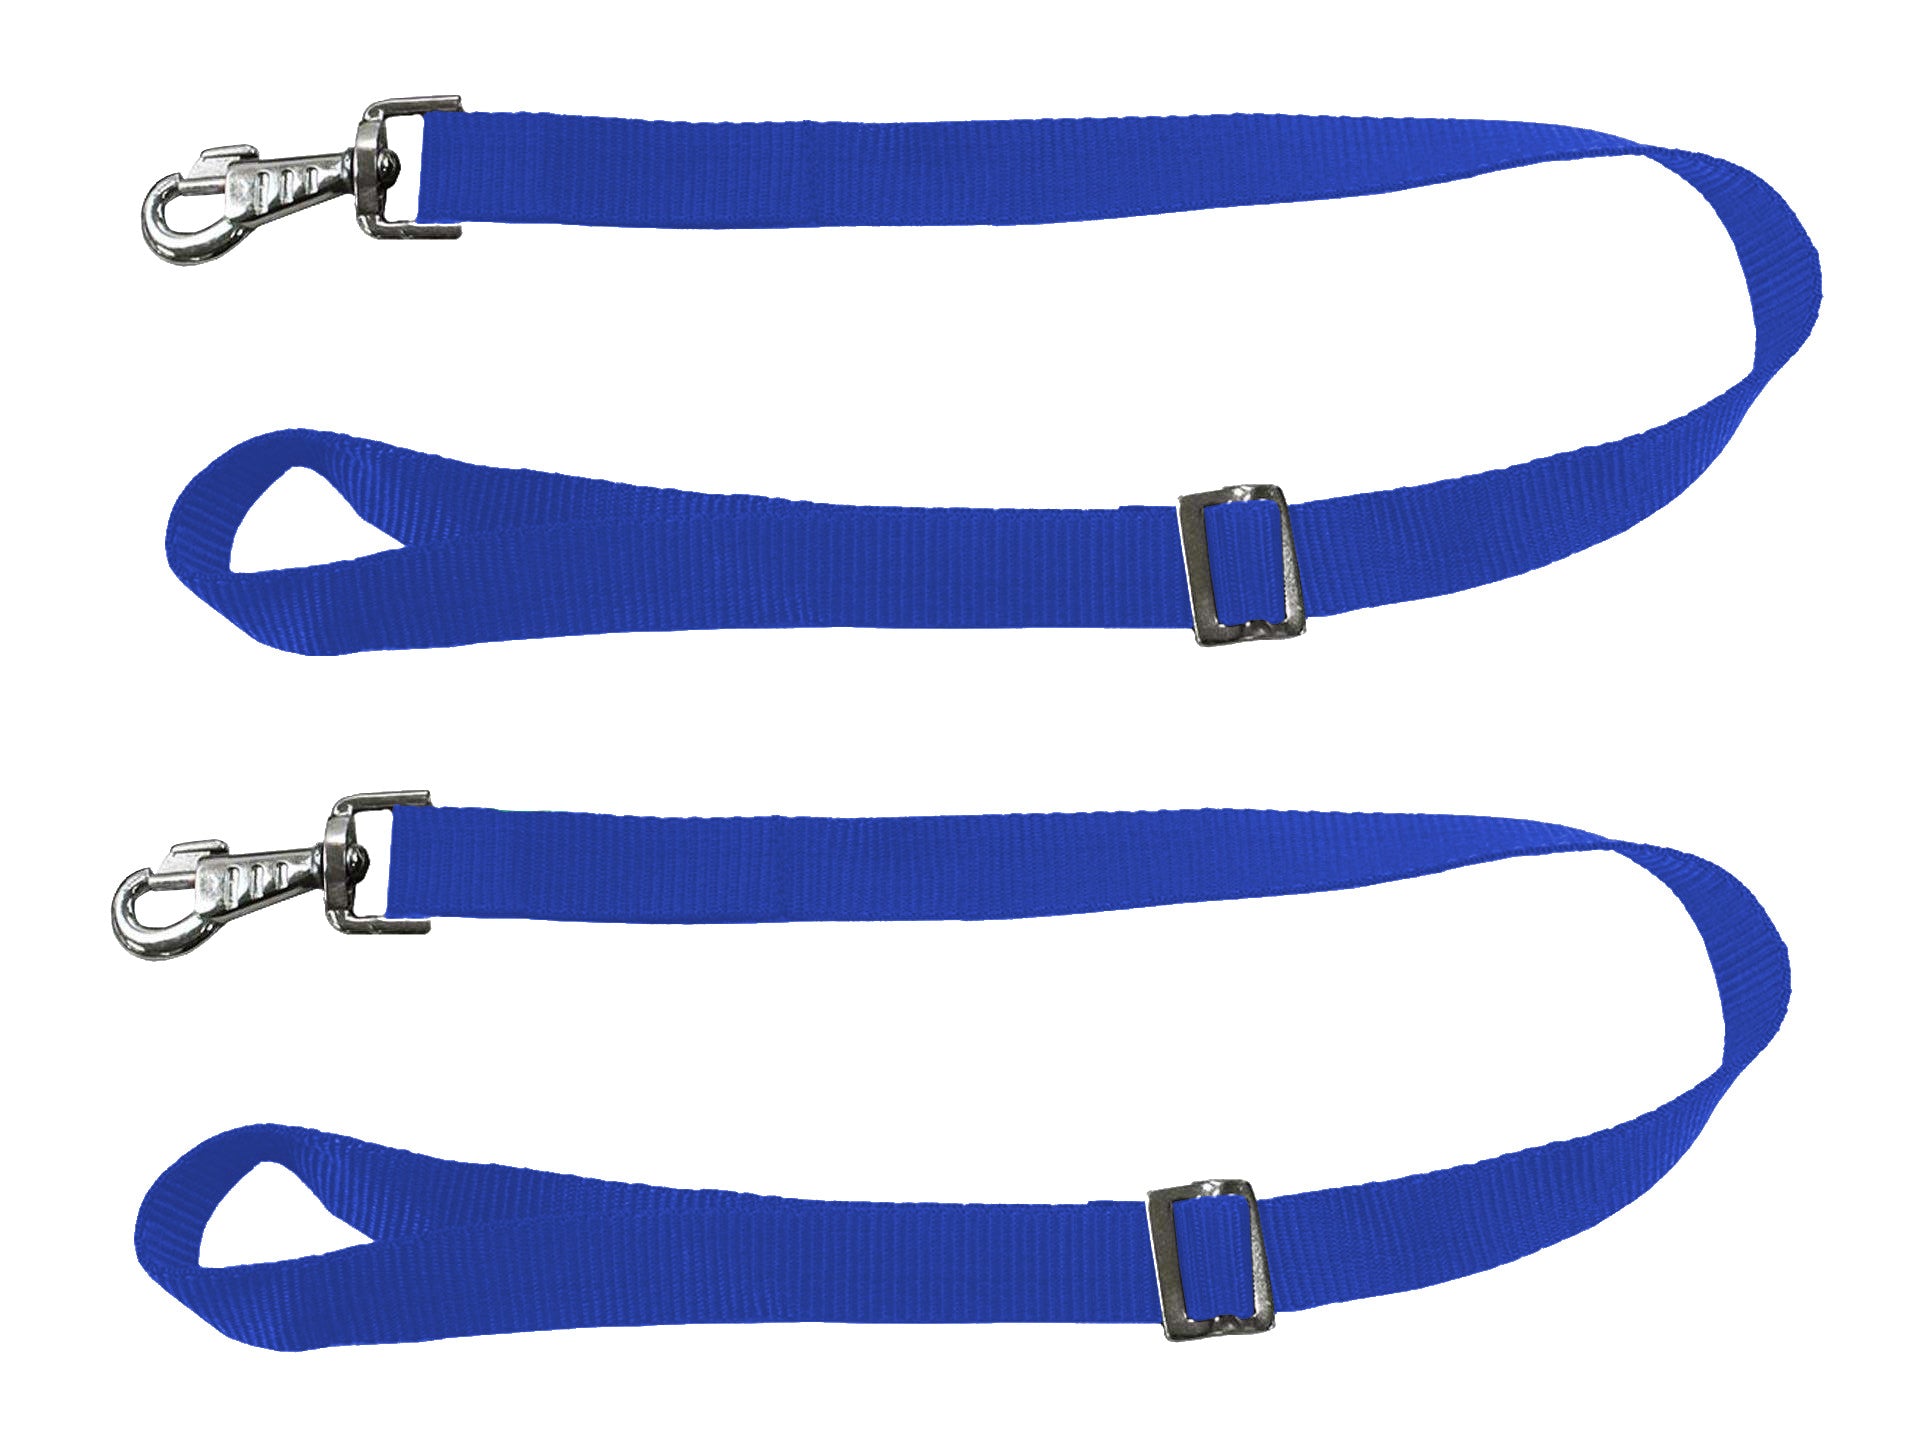 Paris Tack Adjustable Pair of Nylon Replacement Straps for Slow